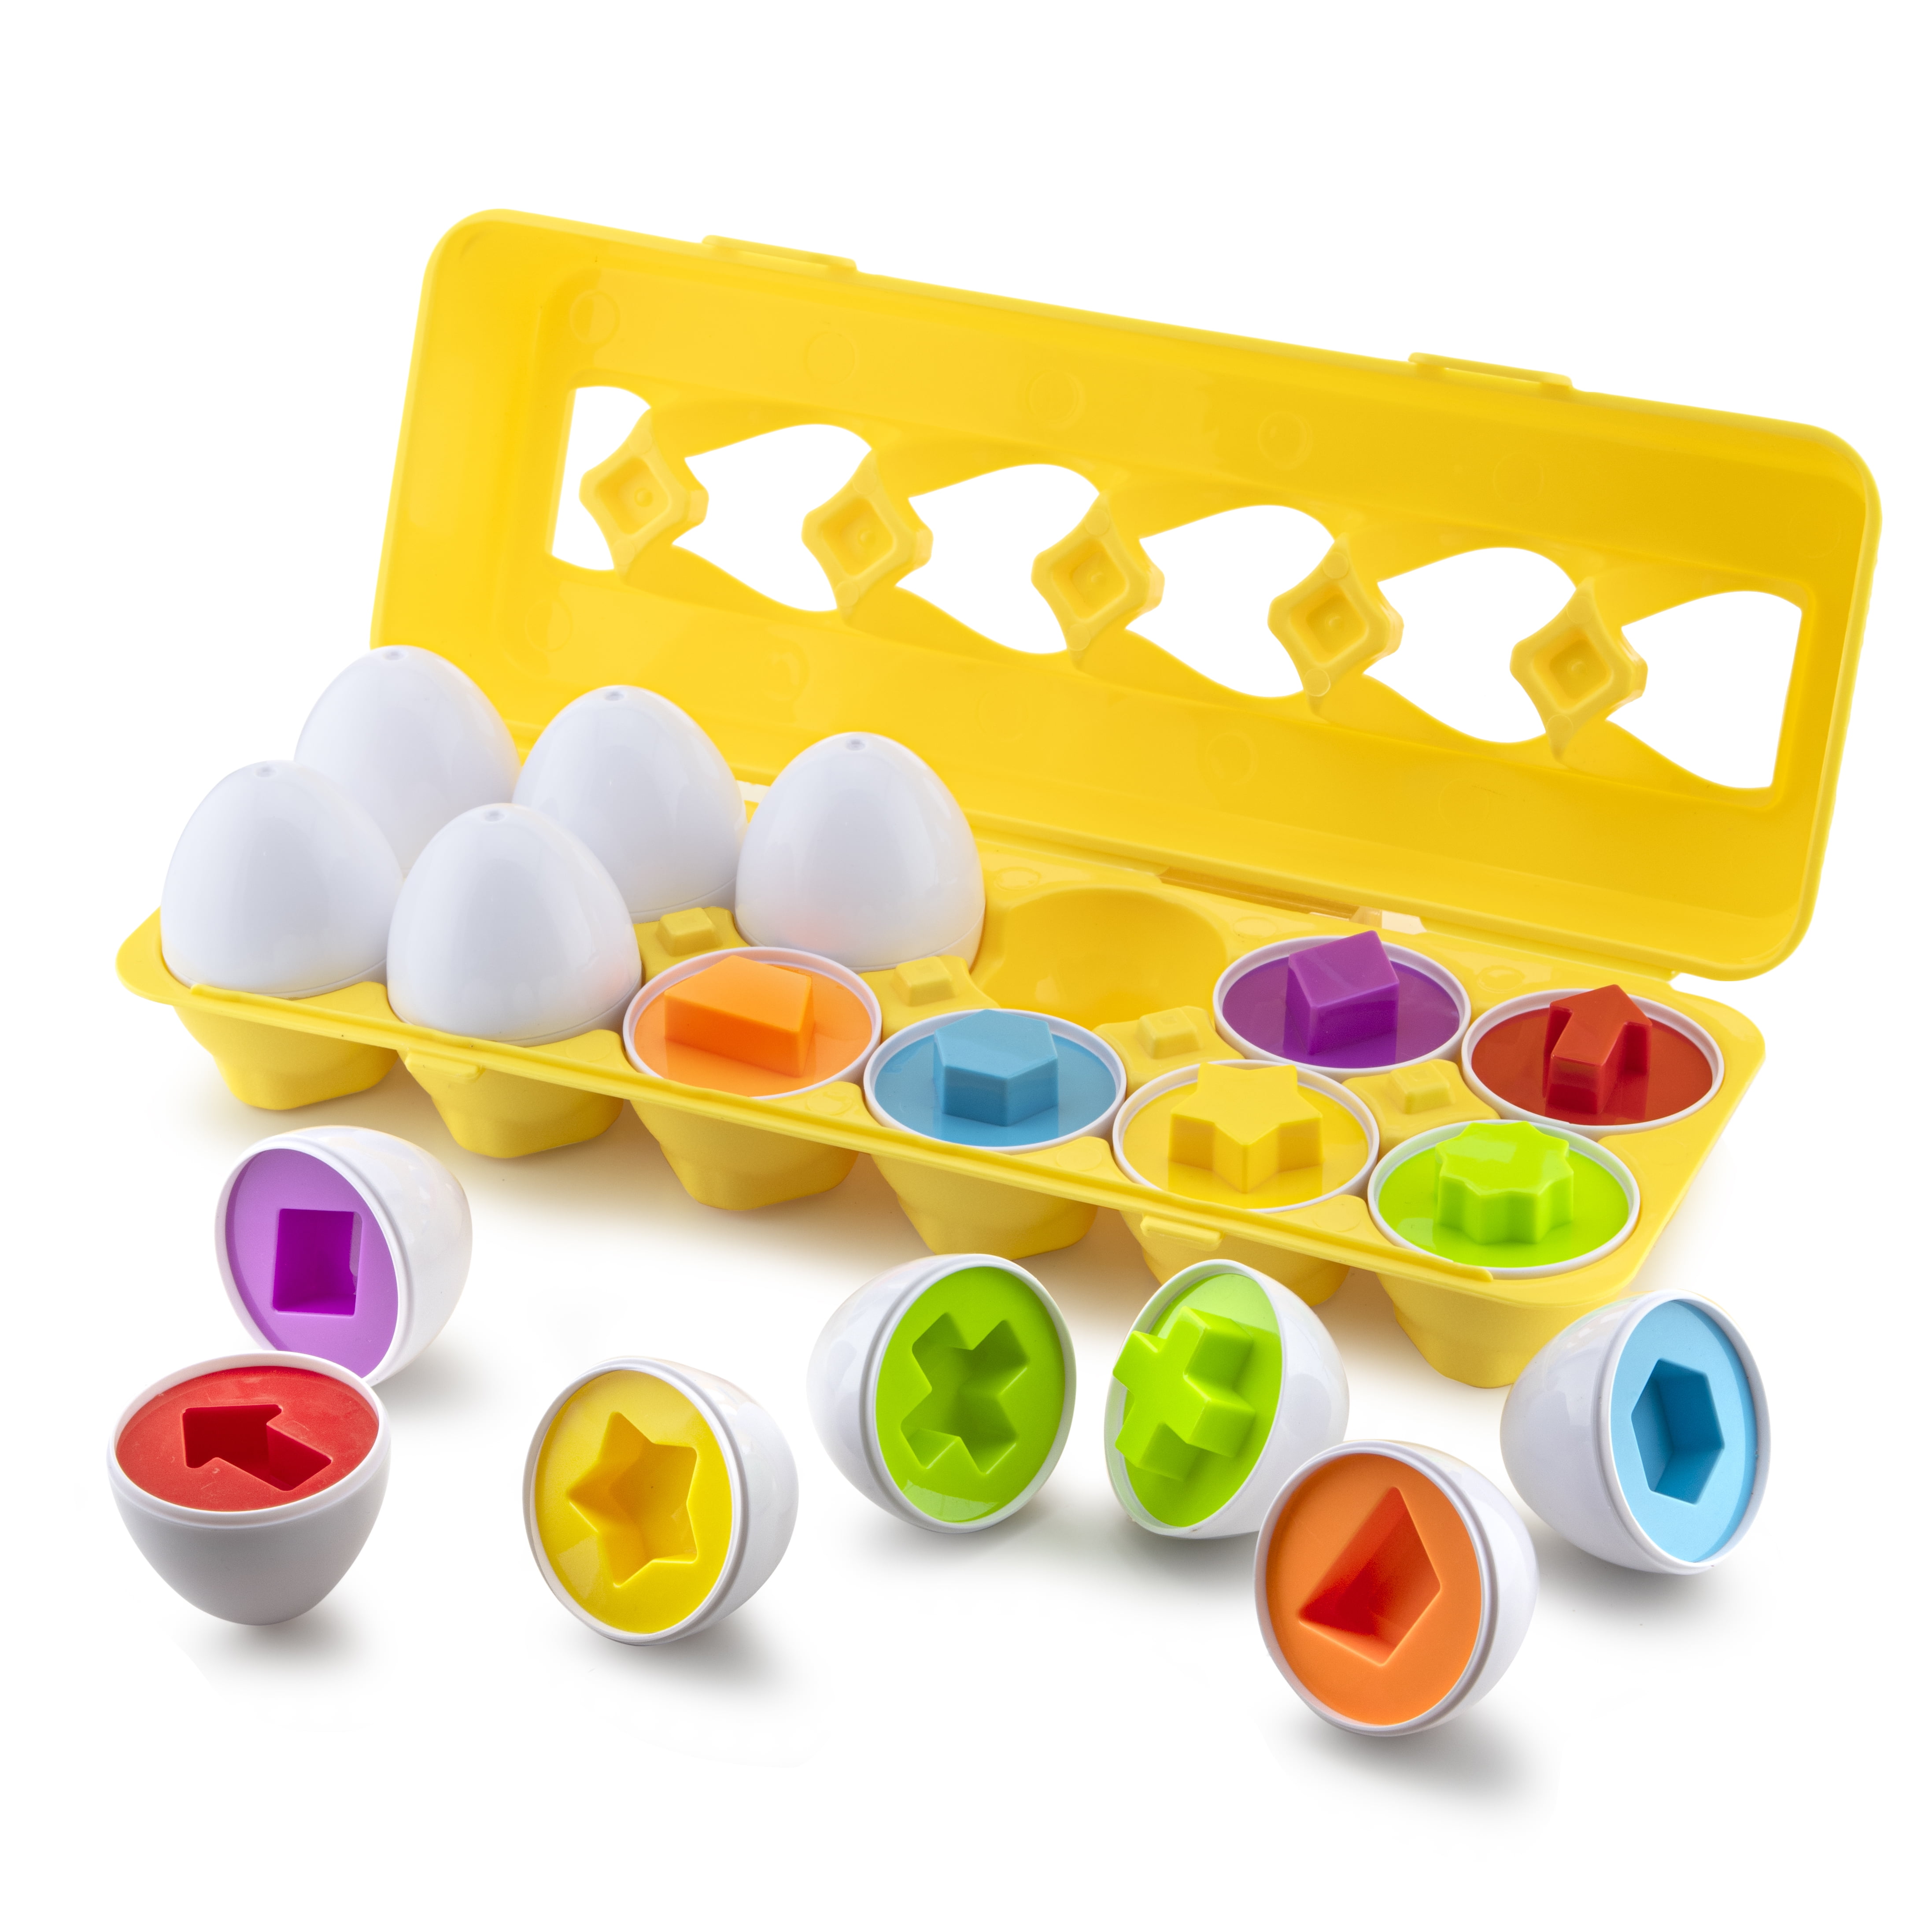 Eggs Shape Wise Pretend Puzzle Tool Colorful Baby Learning Education Toys cfg 